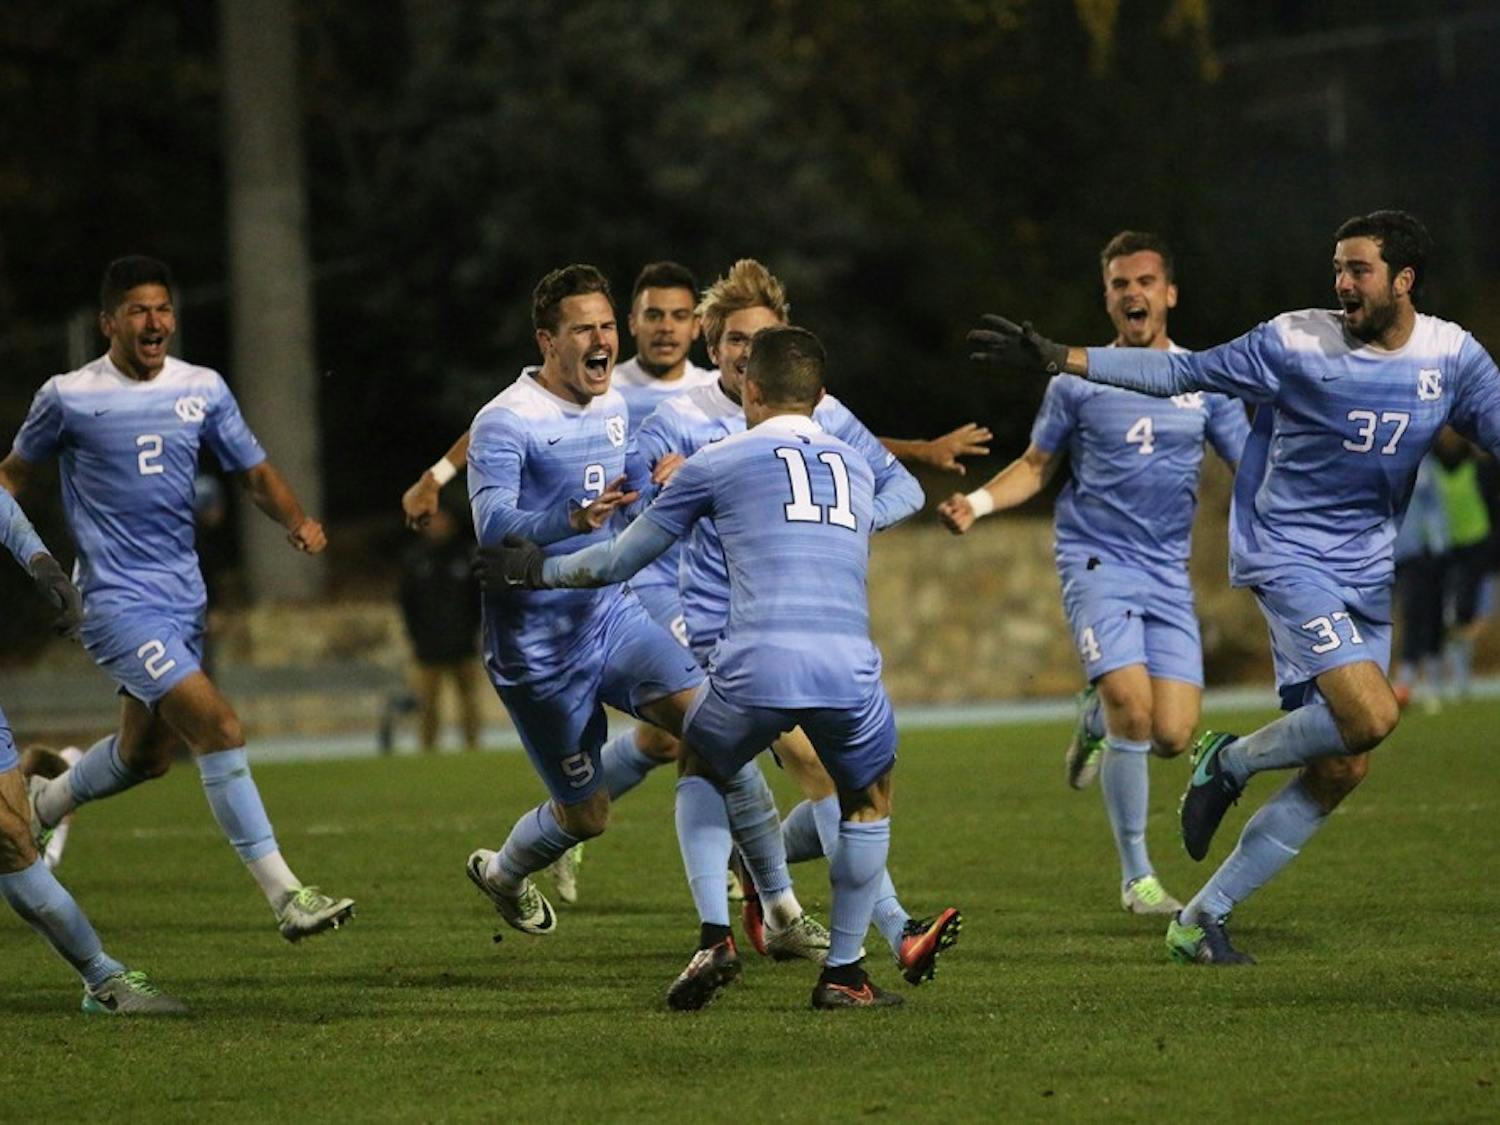 The North Carolina men's soccer team celebrates an overtime win over Providence in the 2016 NCAA Elite Eight.